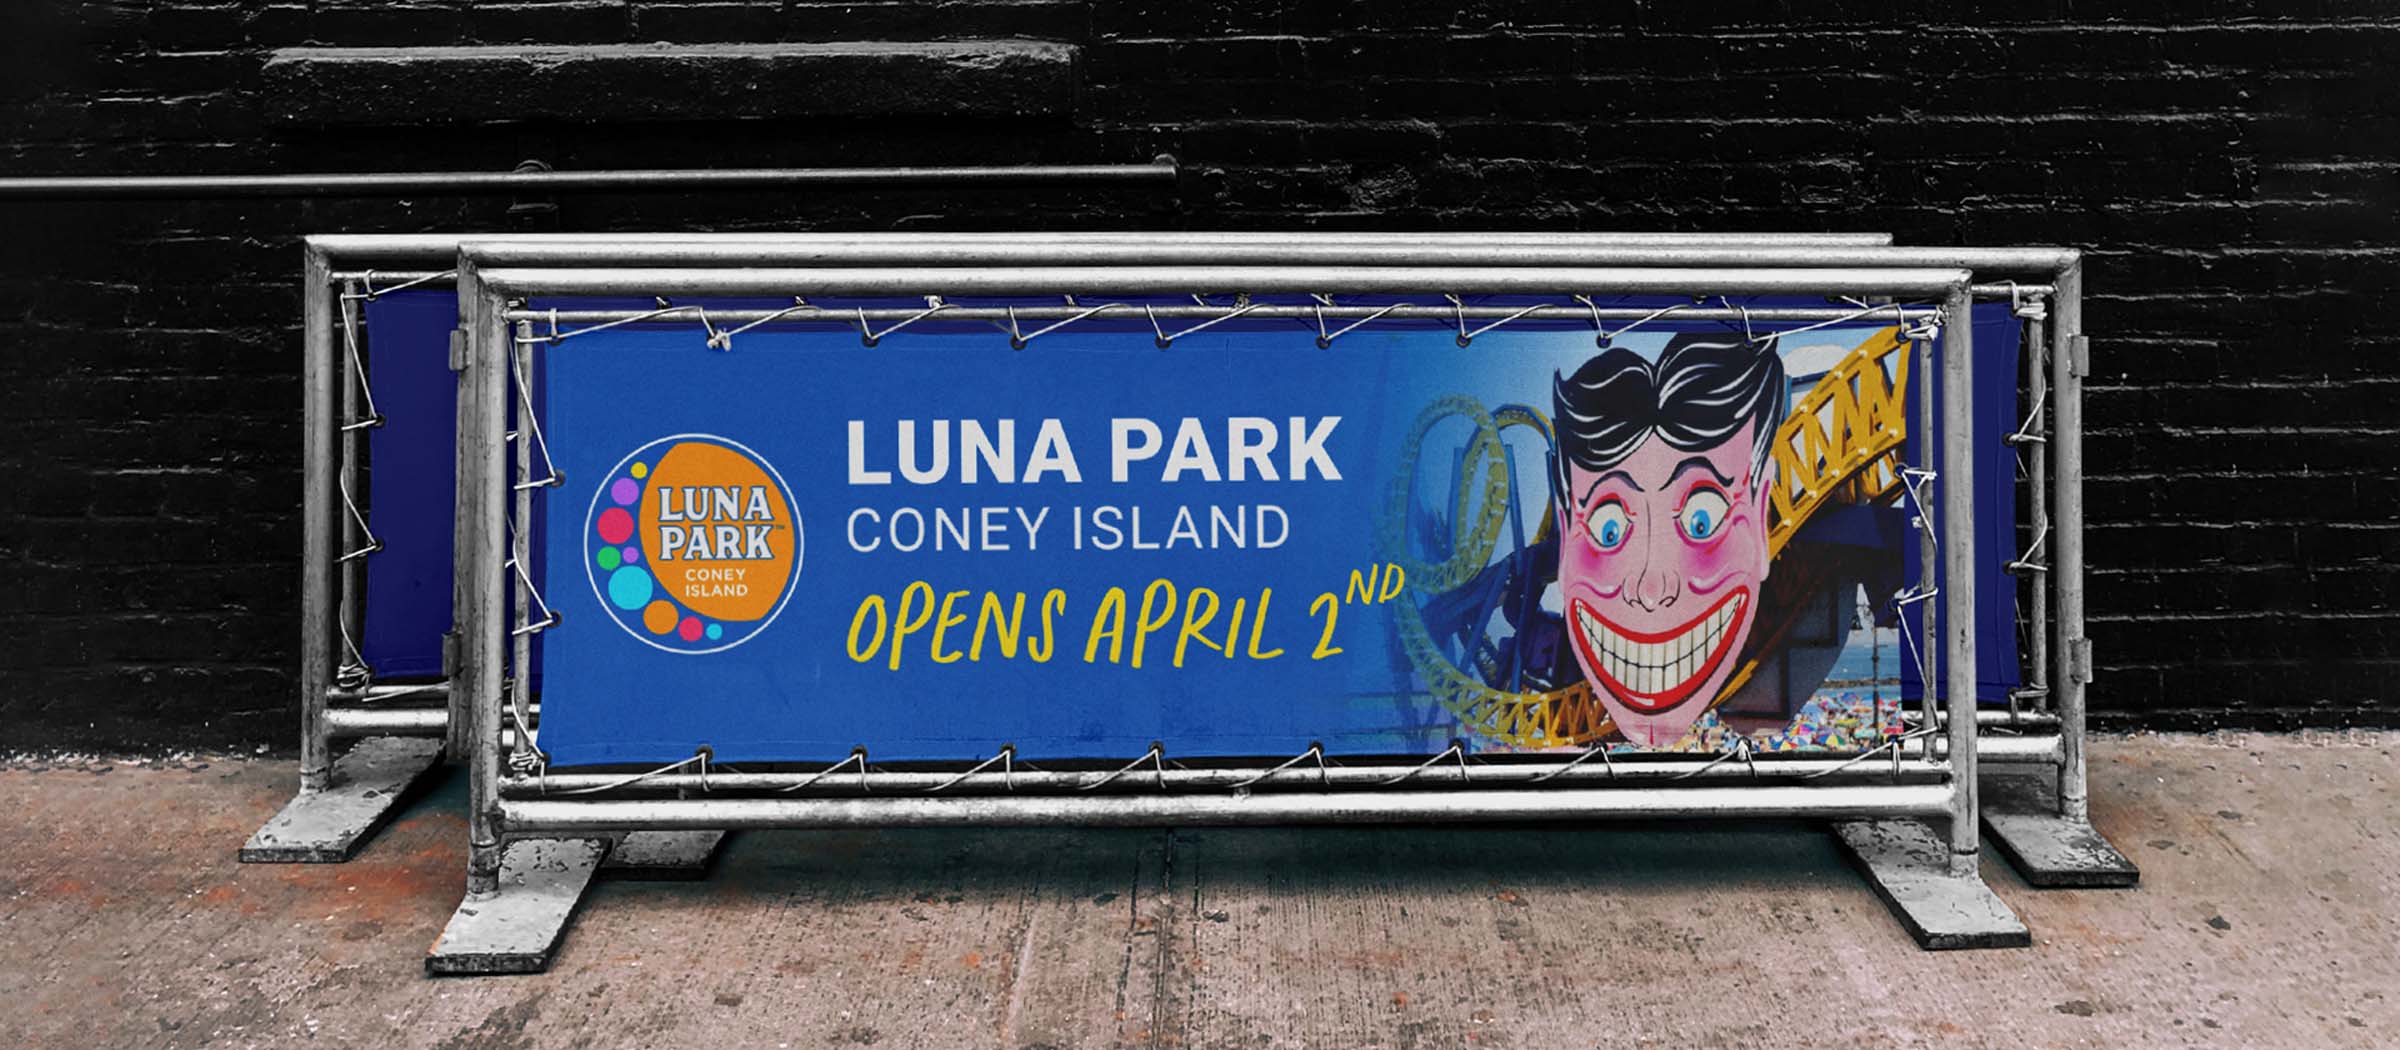 Luna Park in Coney Island - Opening Day 2022 Park Banner Image